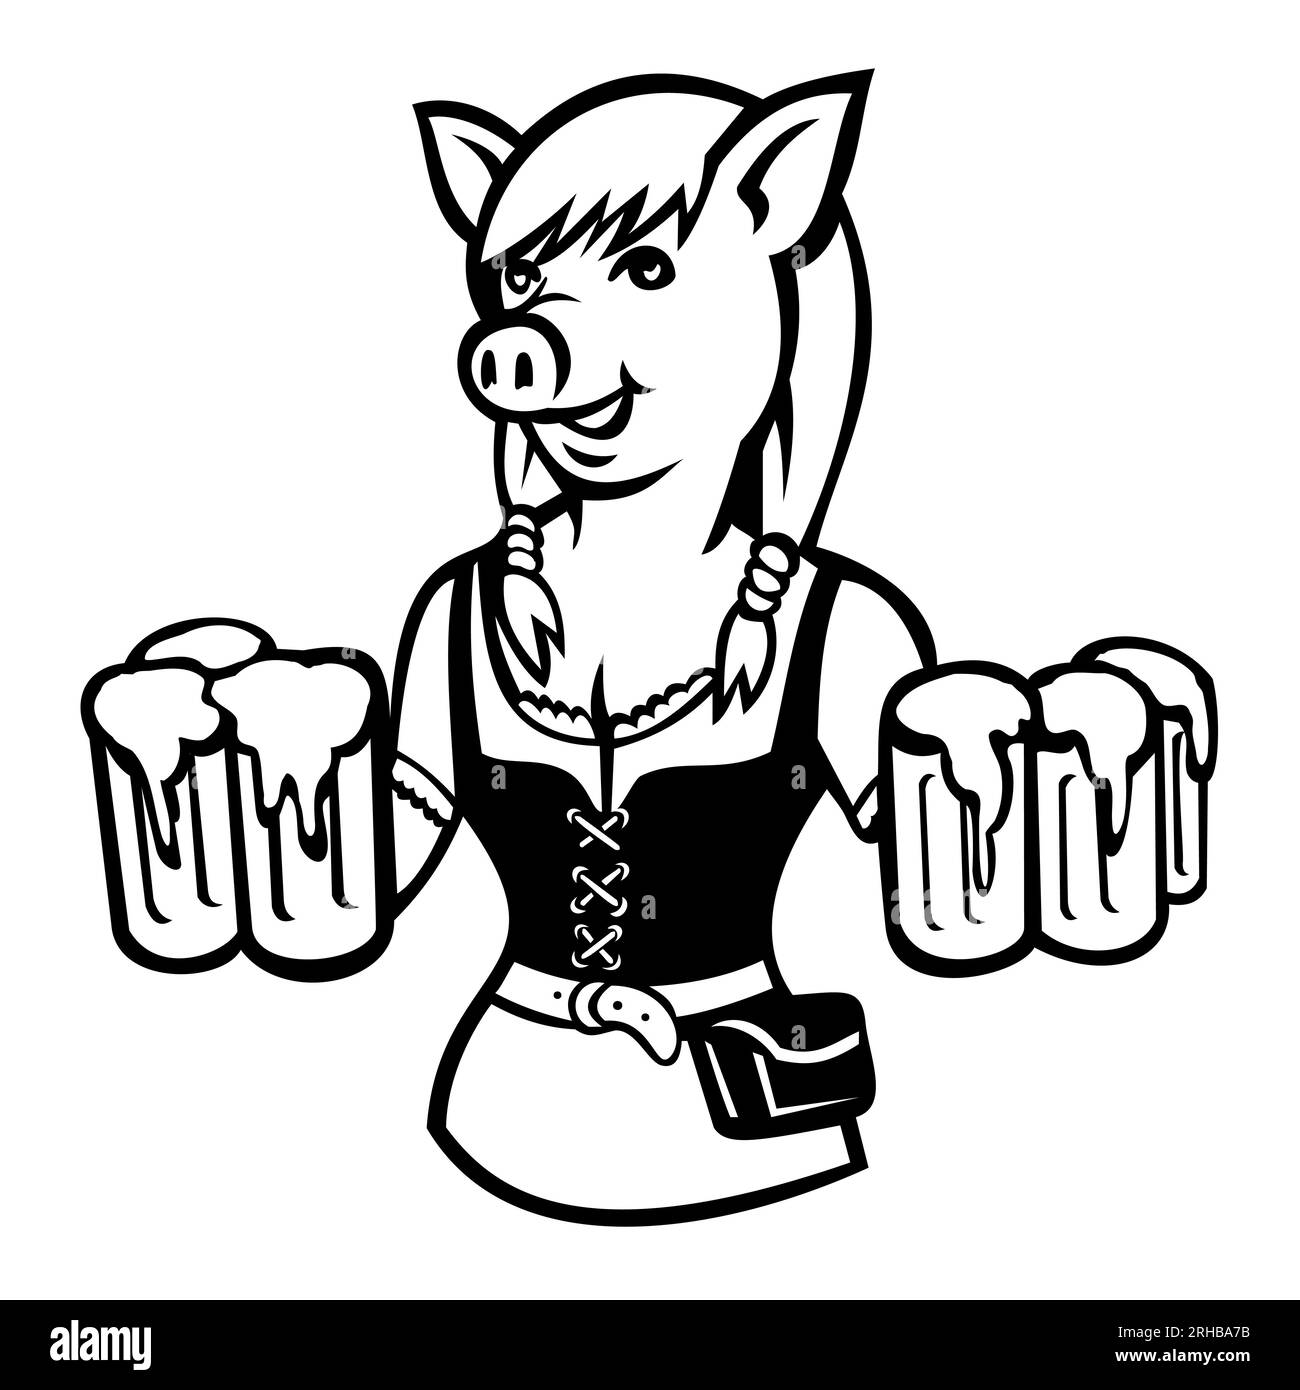 Mascot illustration of lady pig Oktoberfest waitress, beer maid or beer waitress wearing a dirndl serving six mugs of beer viewed from front on isolat Stock Photo